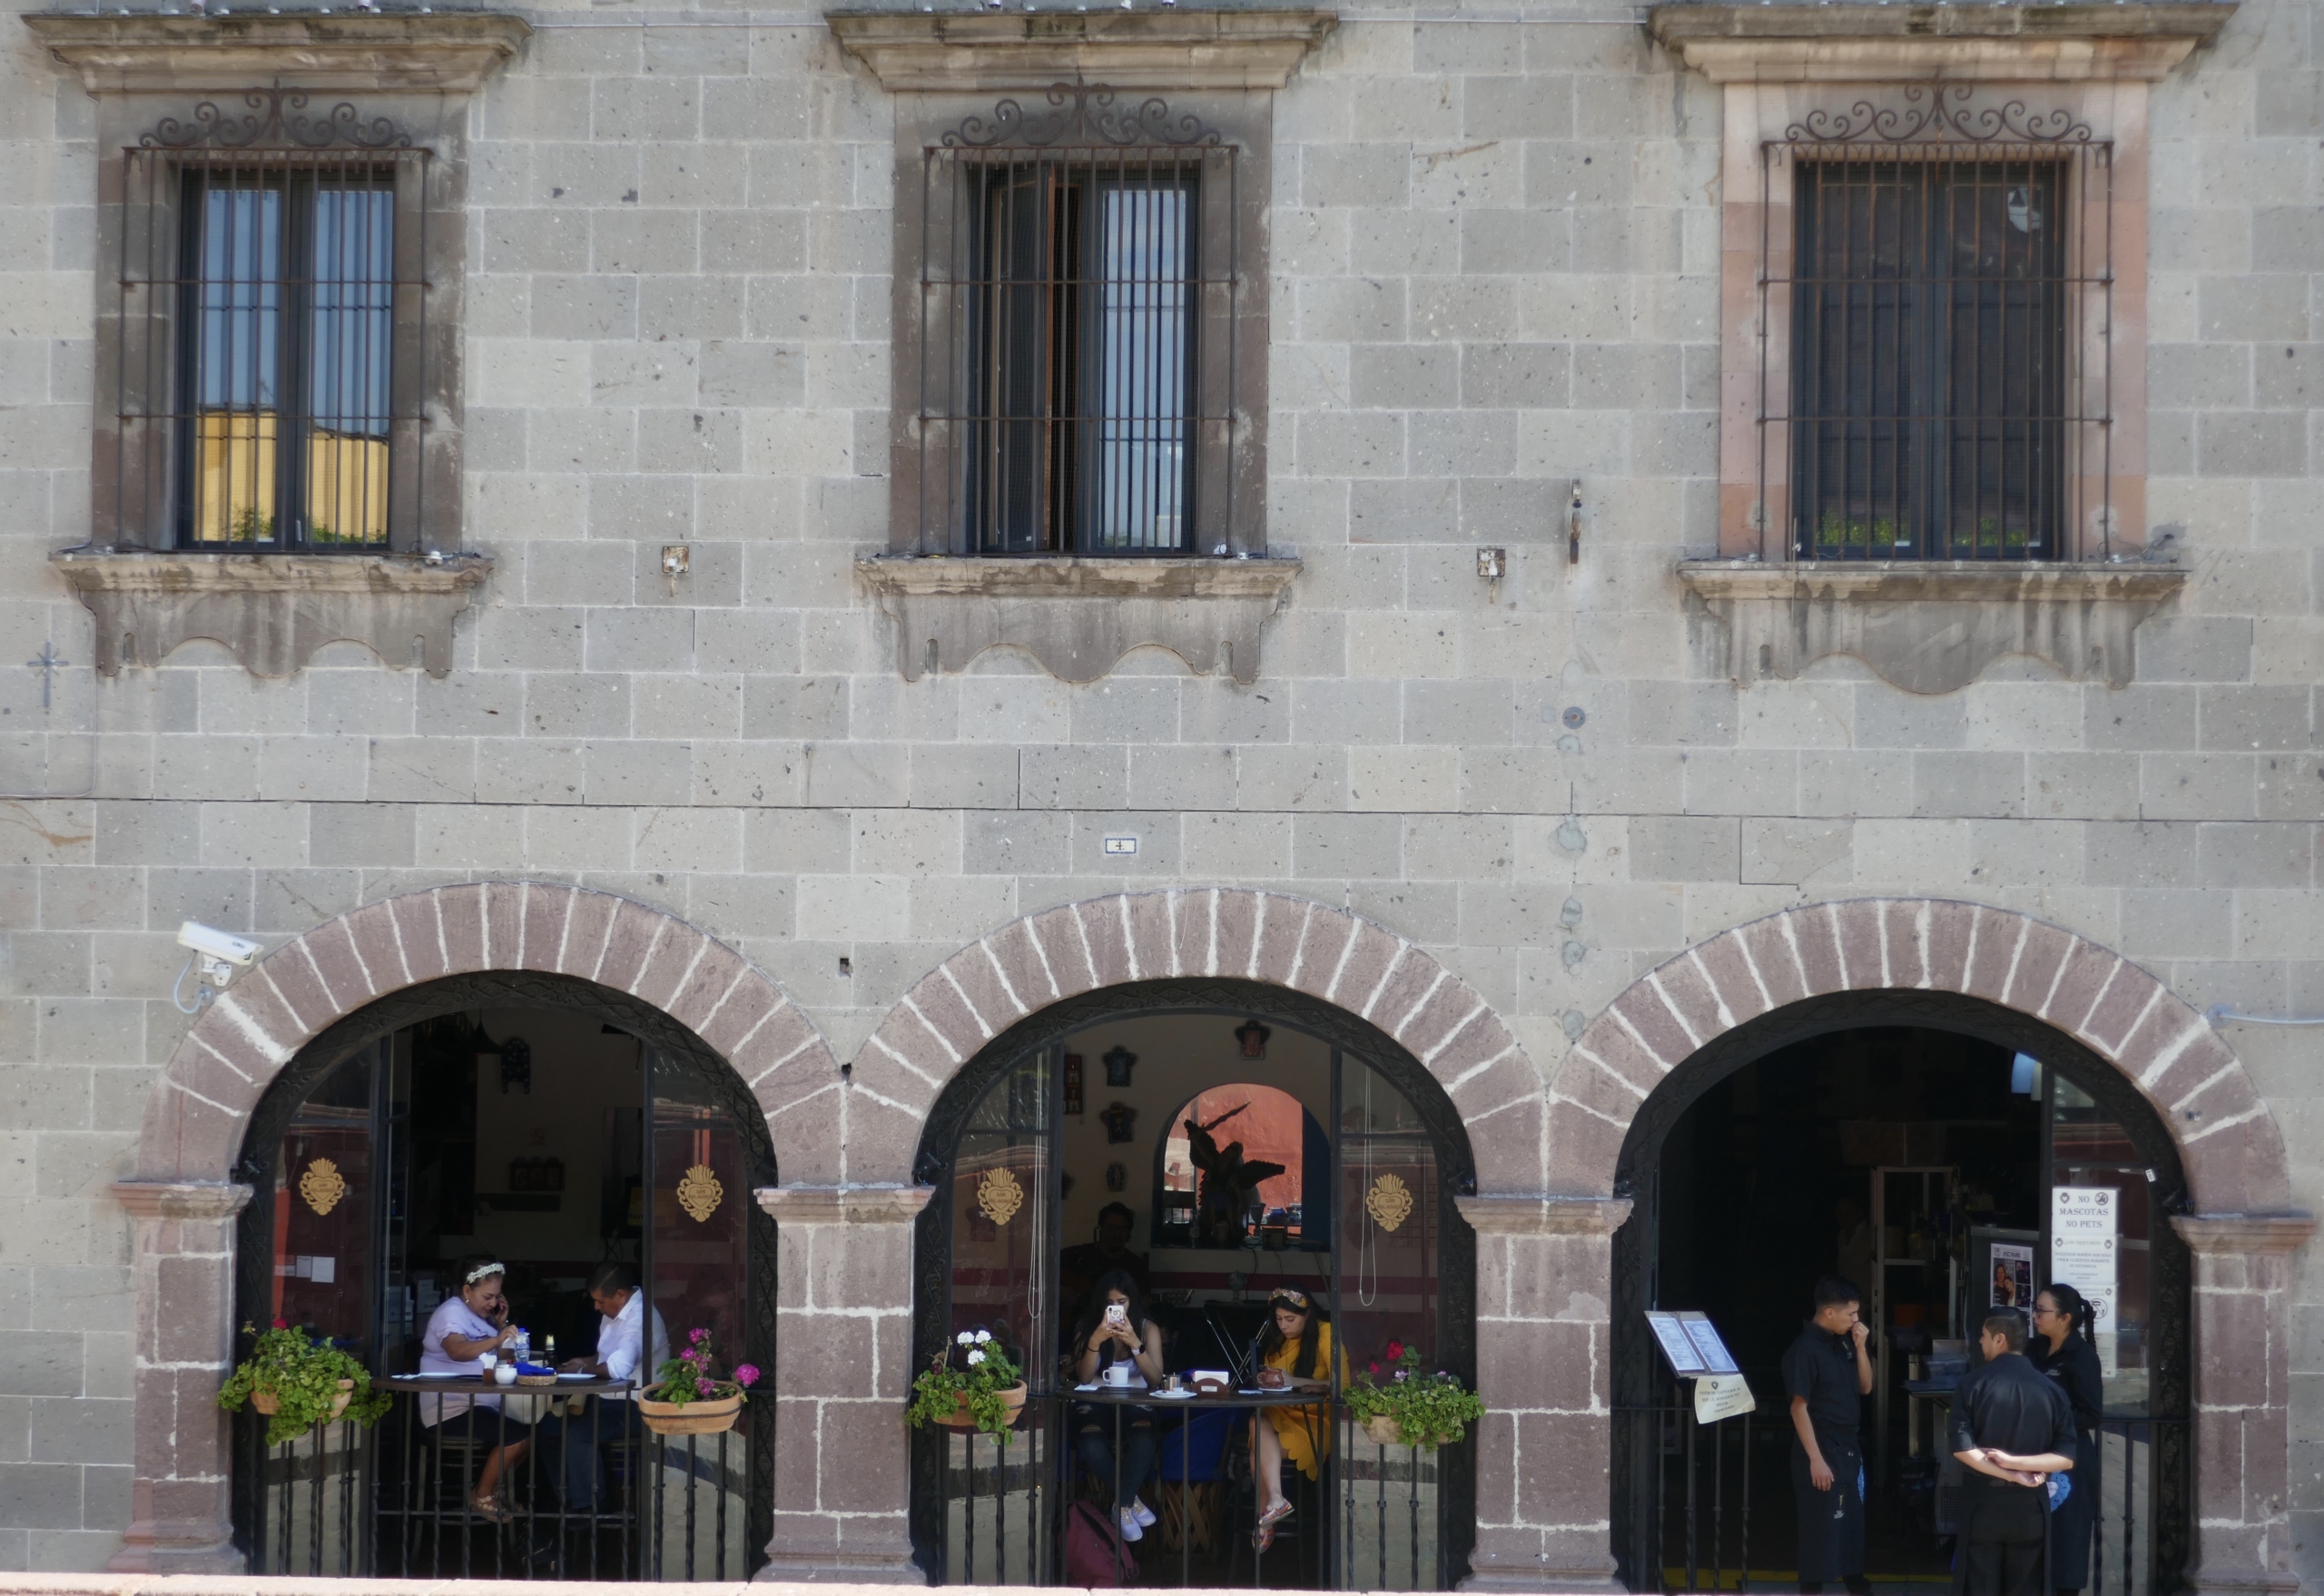 Picture of a restaurant in San Miguel de Allende with three arches